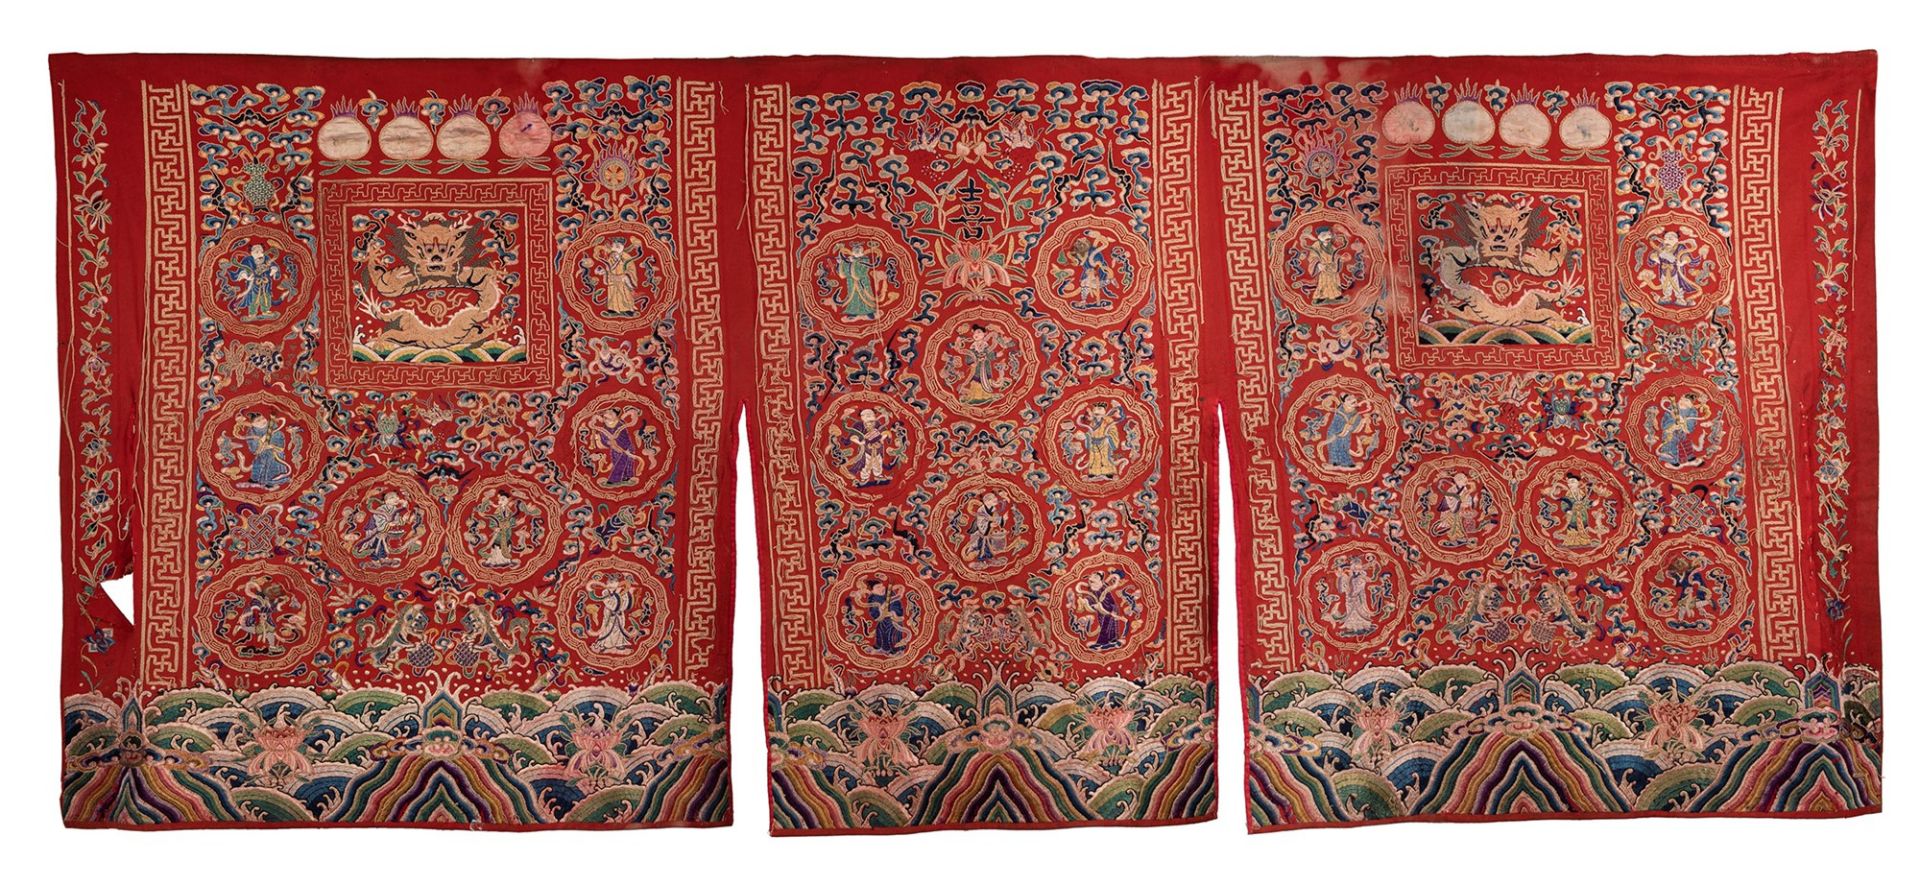 A large embroidered panel. China, early 20th century